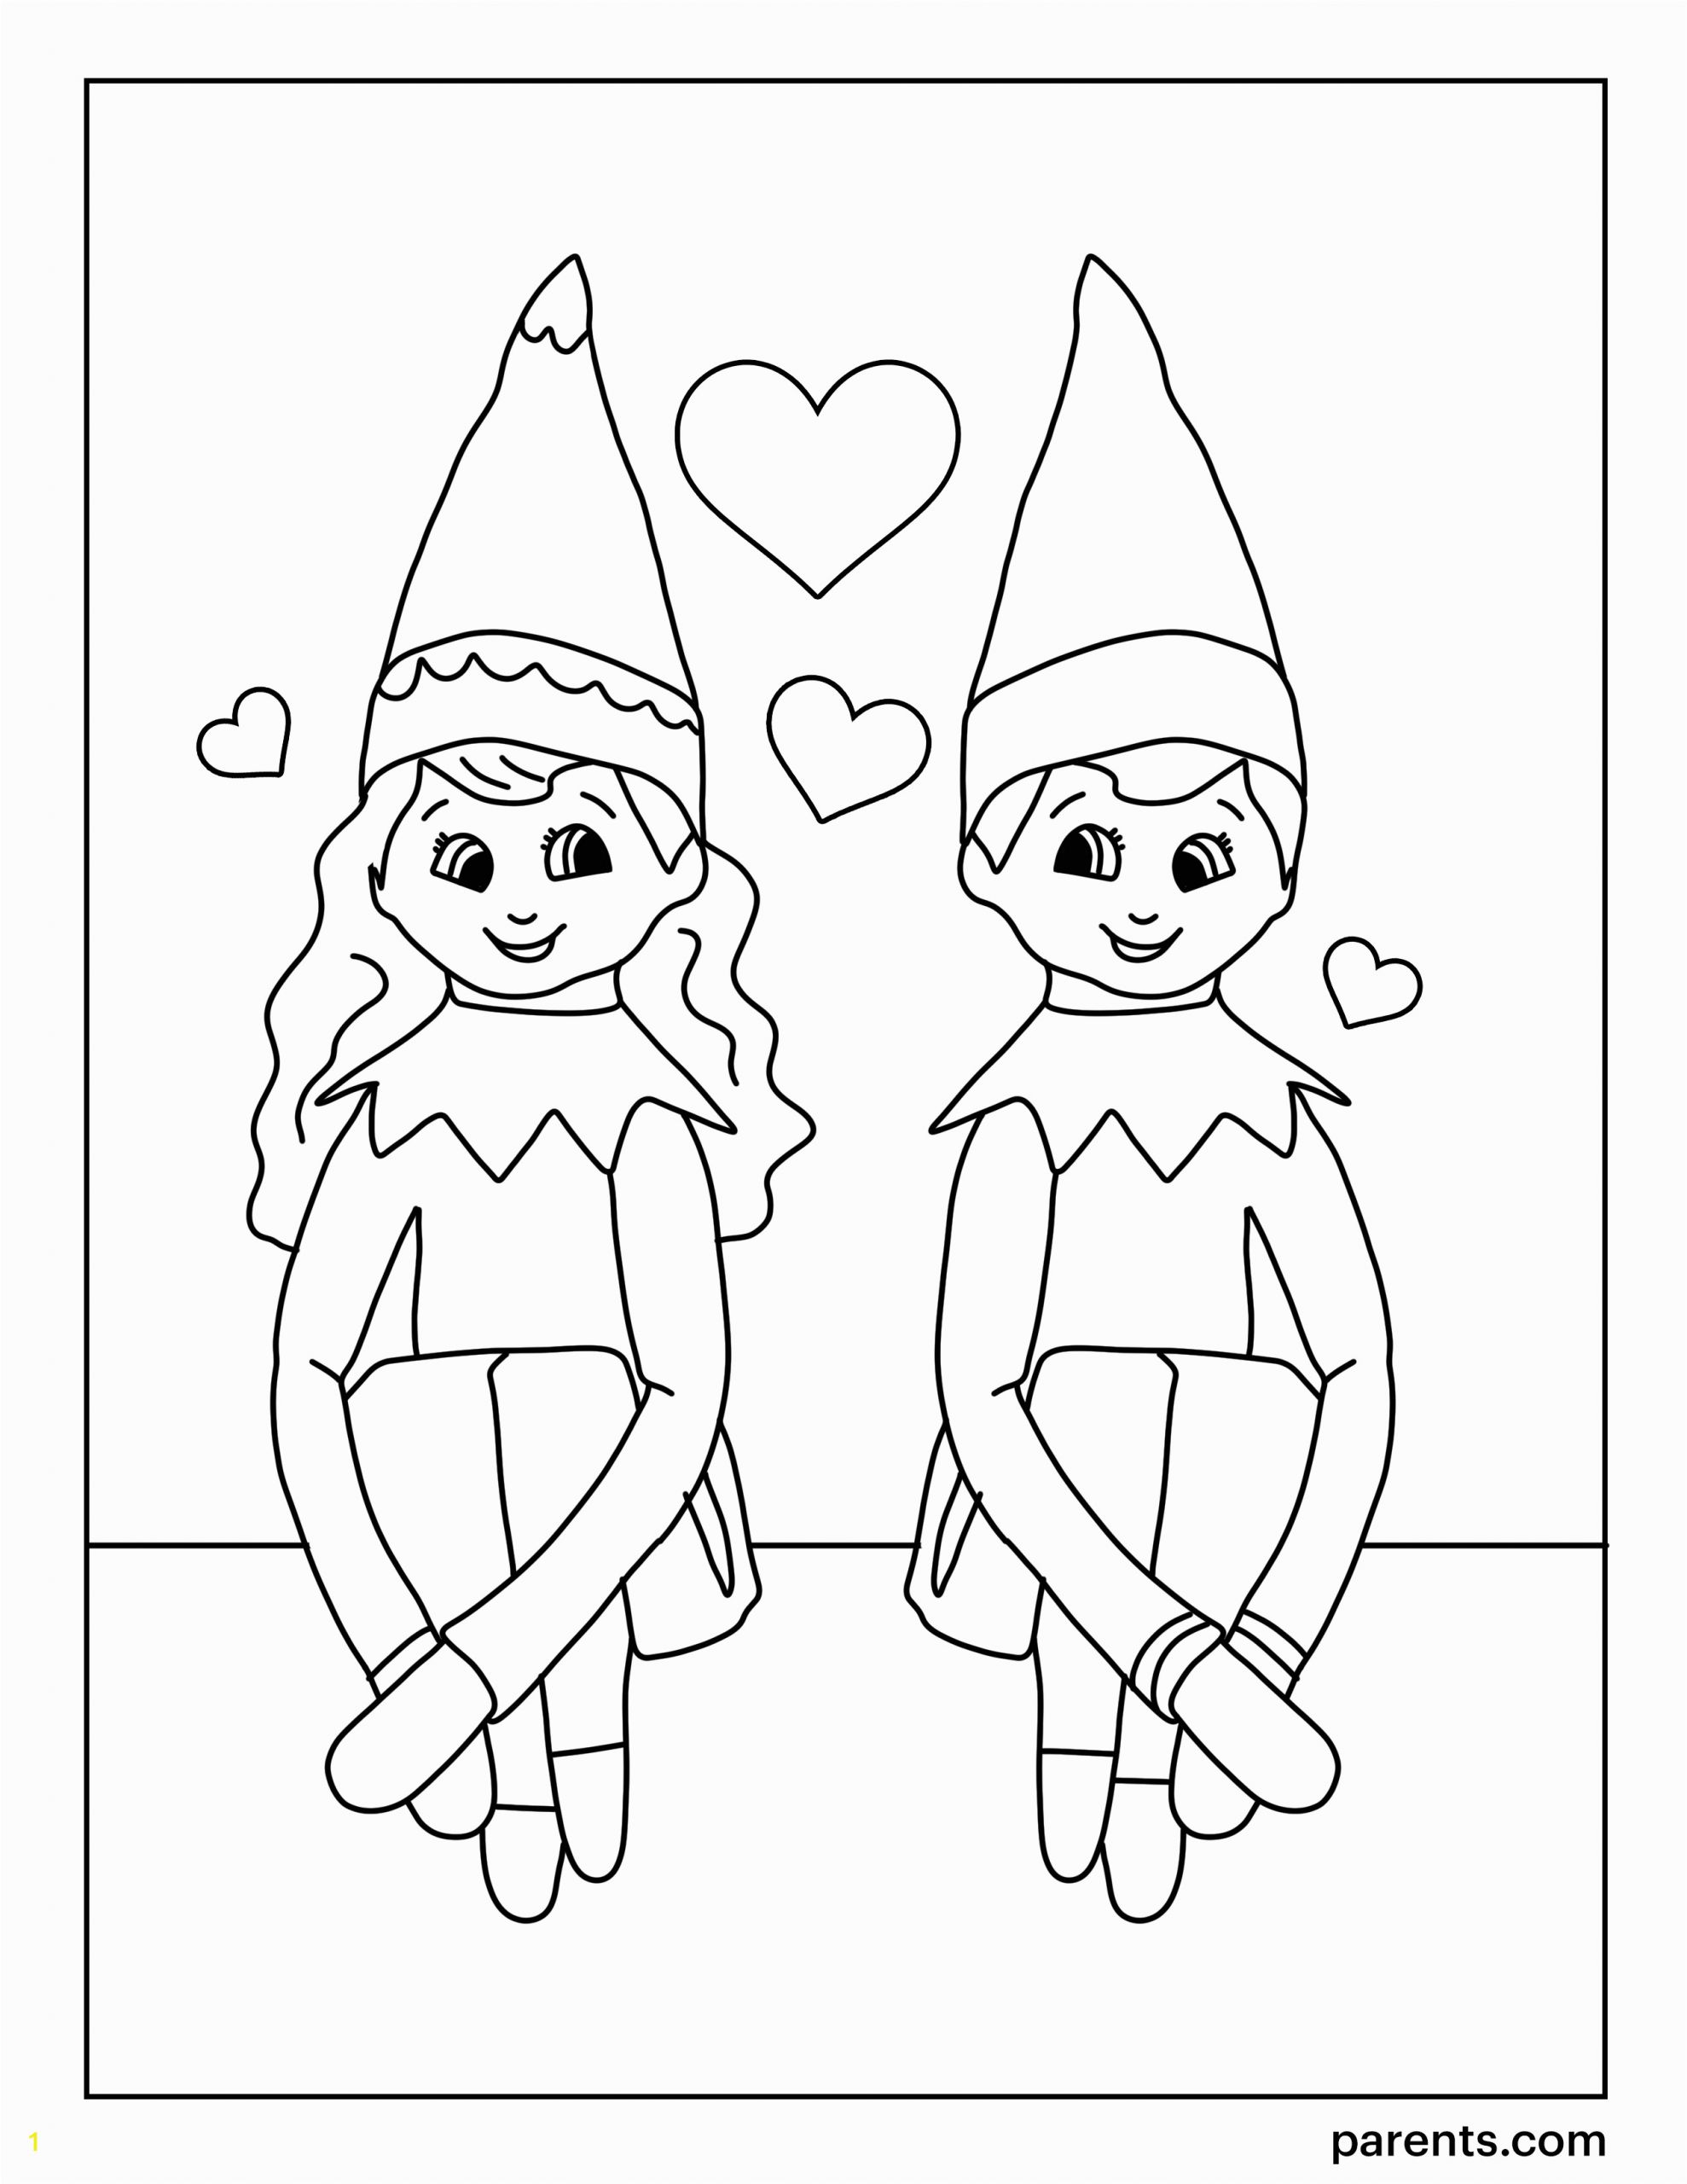 Girl Elf On the Shelf Coloring Pages 7 Elf On the Shelf Inspired Coloring Pages to Get Kids